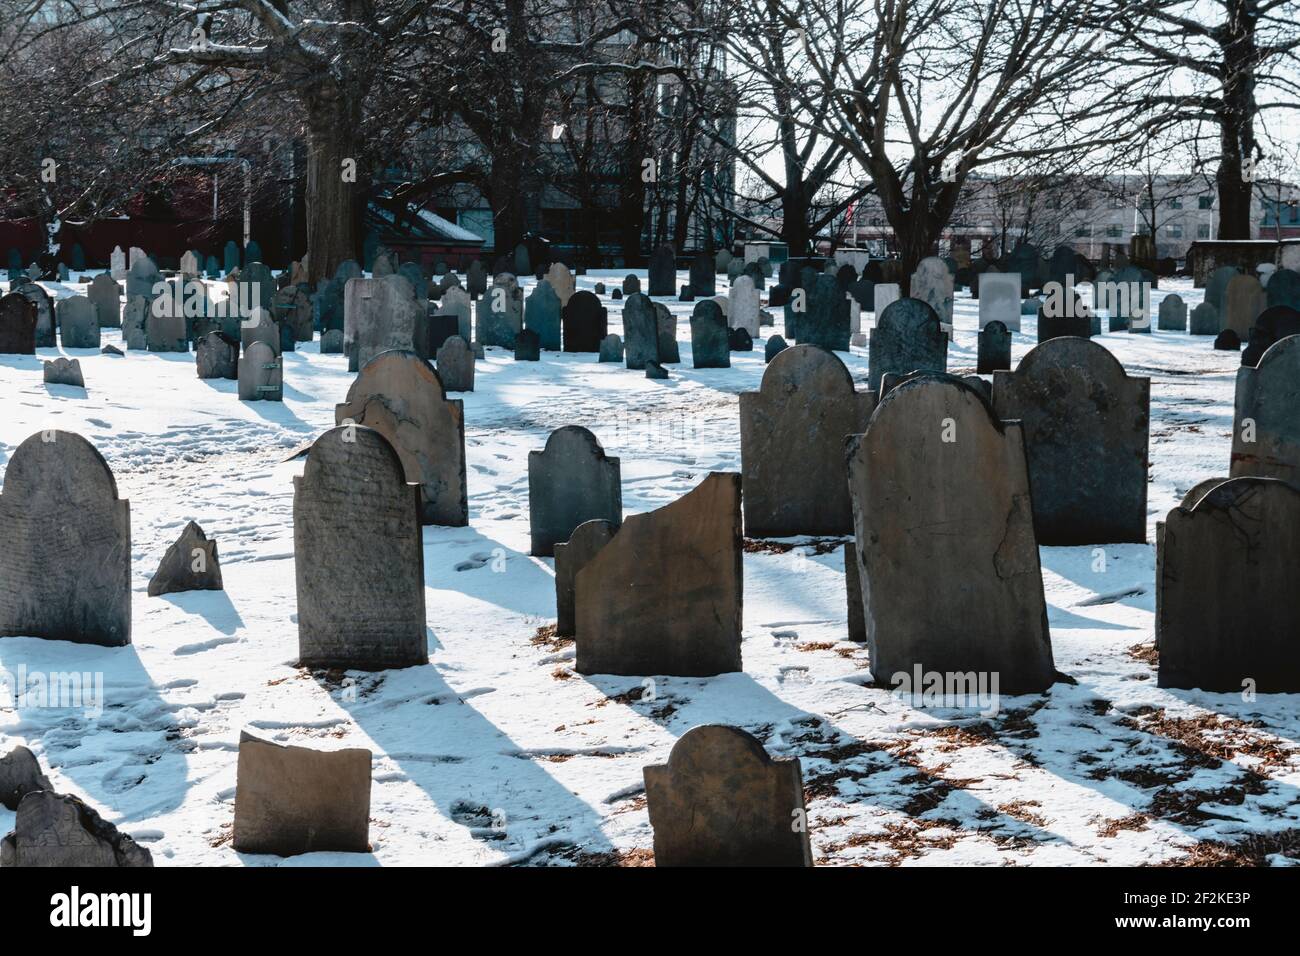 Winter in Witch City of Salem, Essex, New England, Boston, United States of America, Massachusetts, Graveyard of Witch burnings, Gravestone, Stock Photo